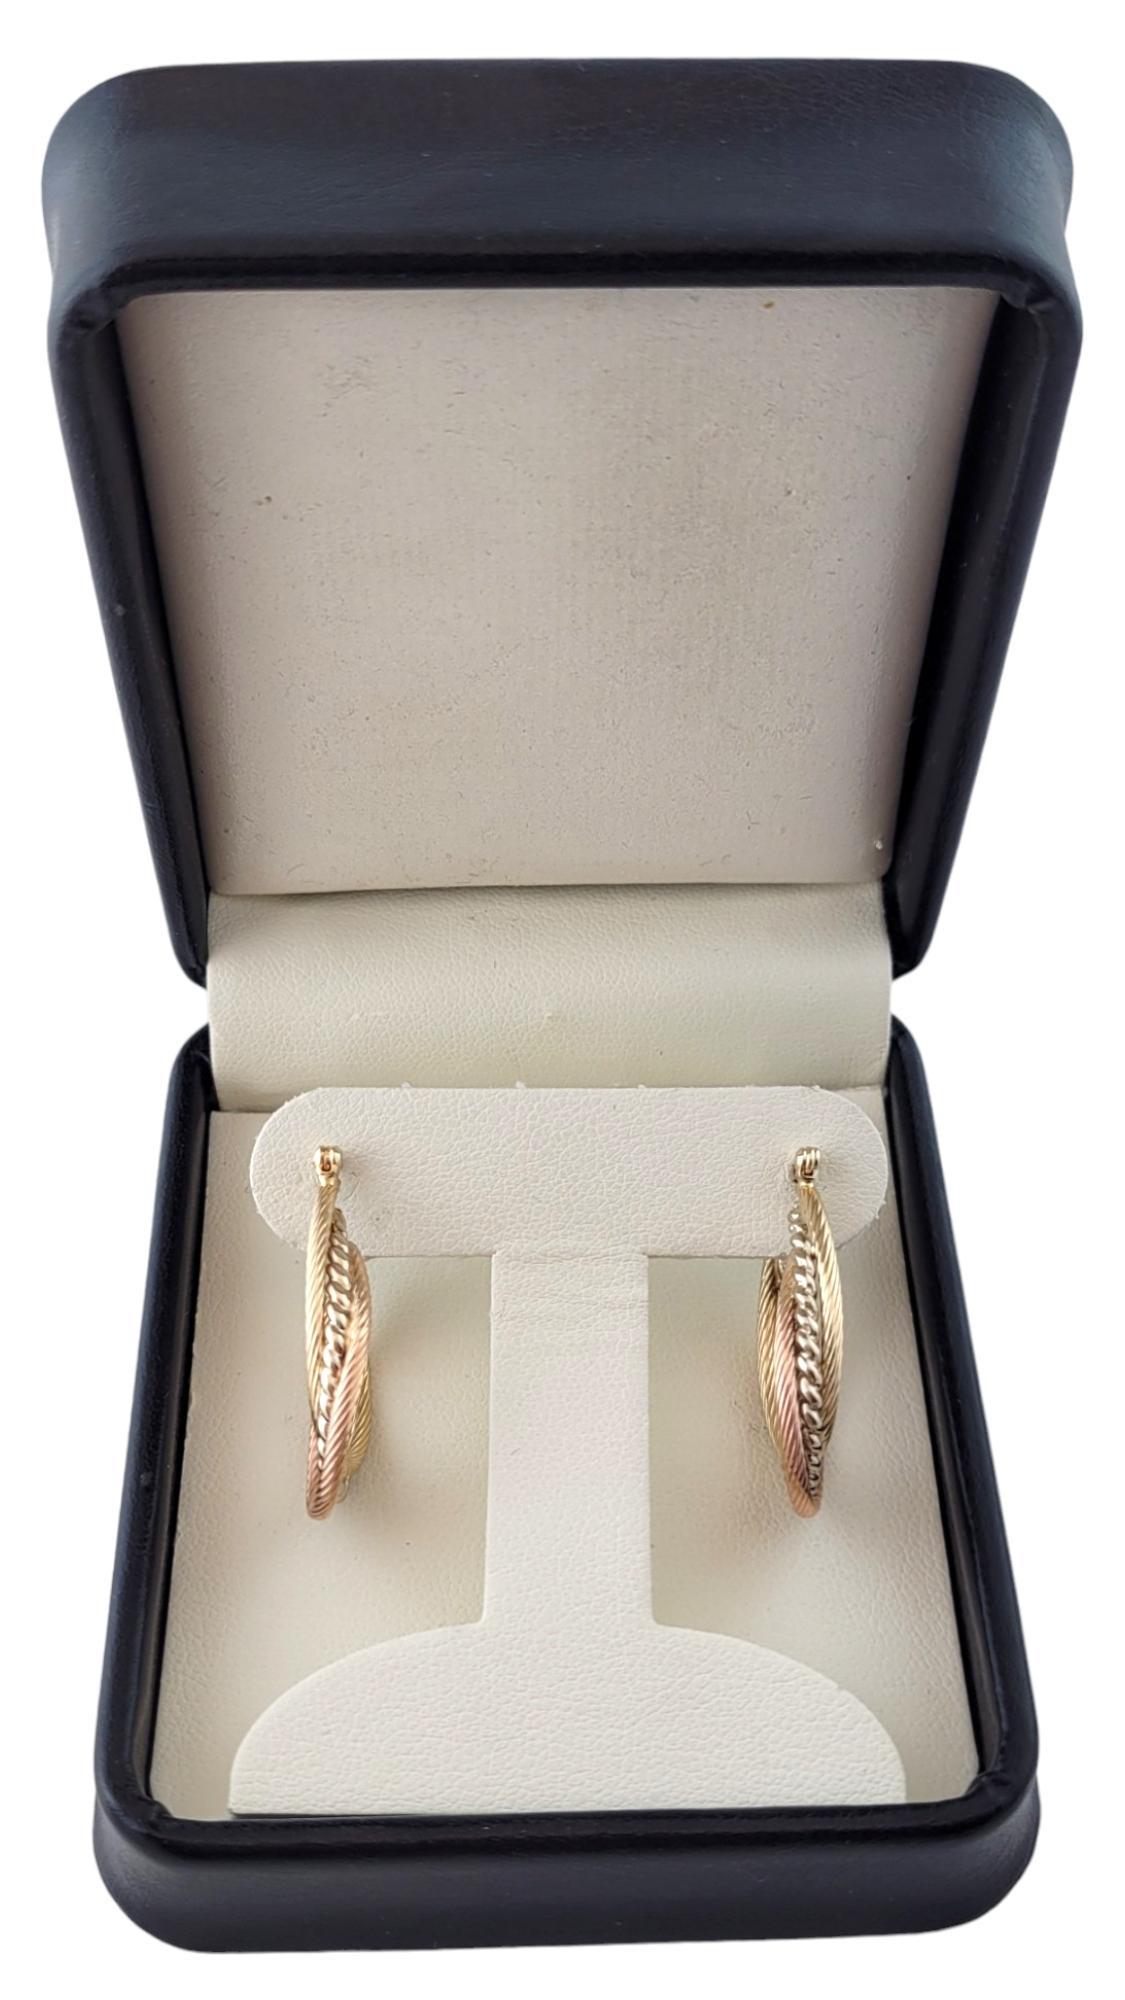 14K Yellow, White and Rose Gold Tri-Colored Twisted Oval Hoops #16444 For Sale 2